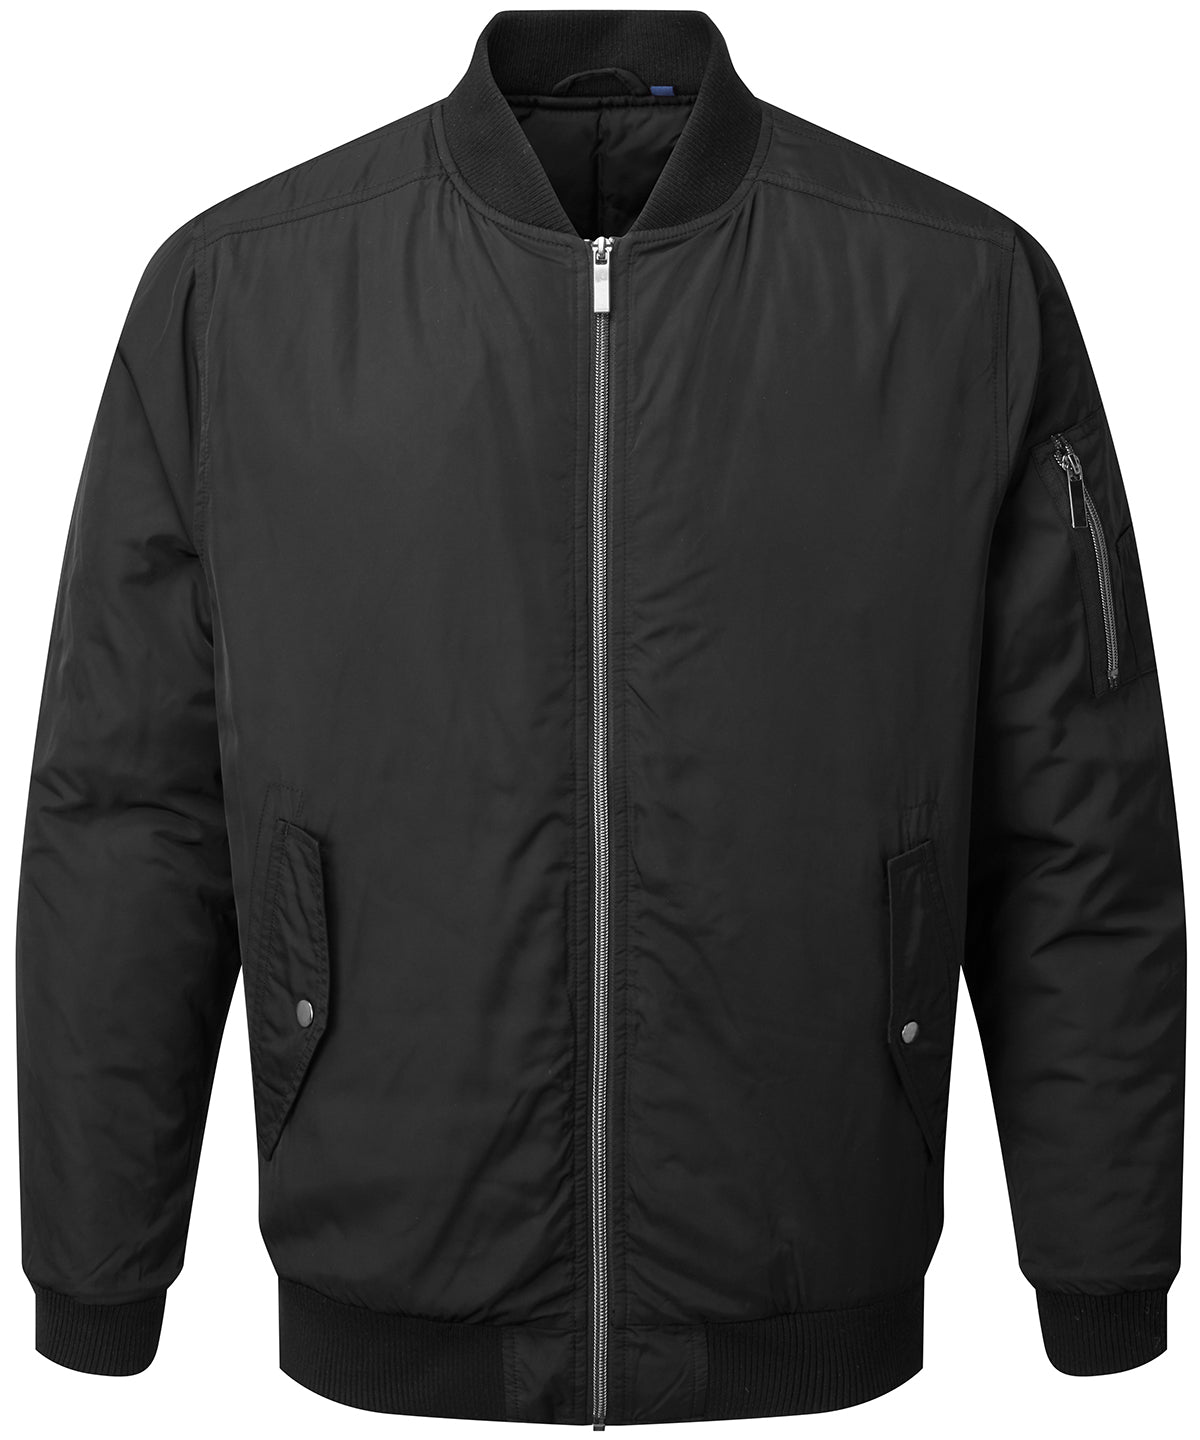 Personalised Jackets - Black Asquith & Fox Men's padded bomber